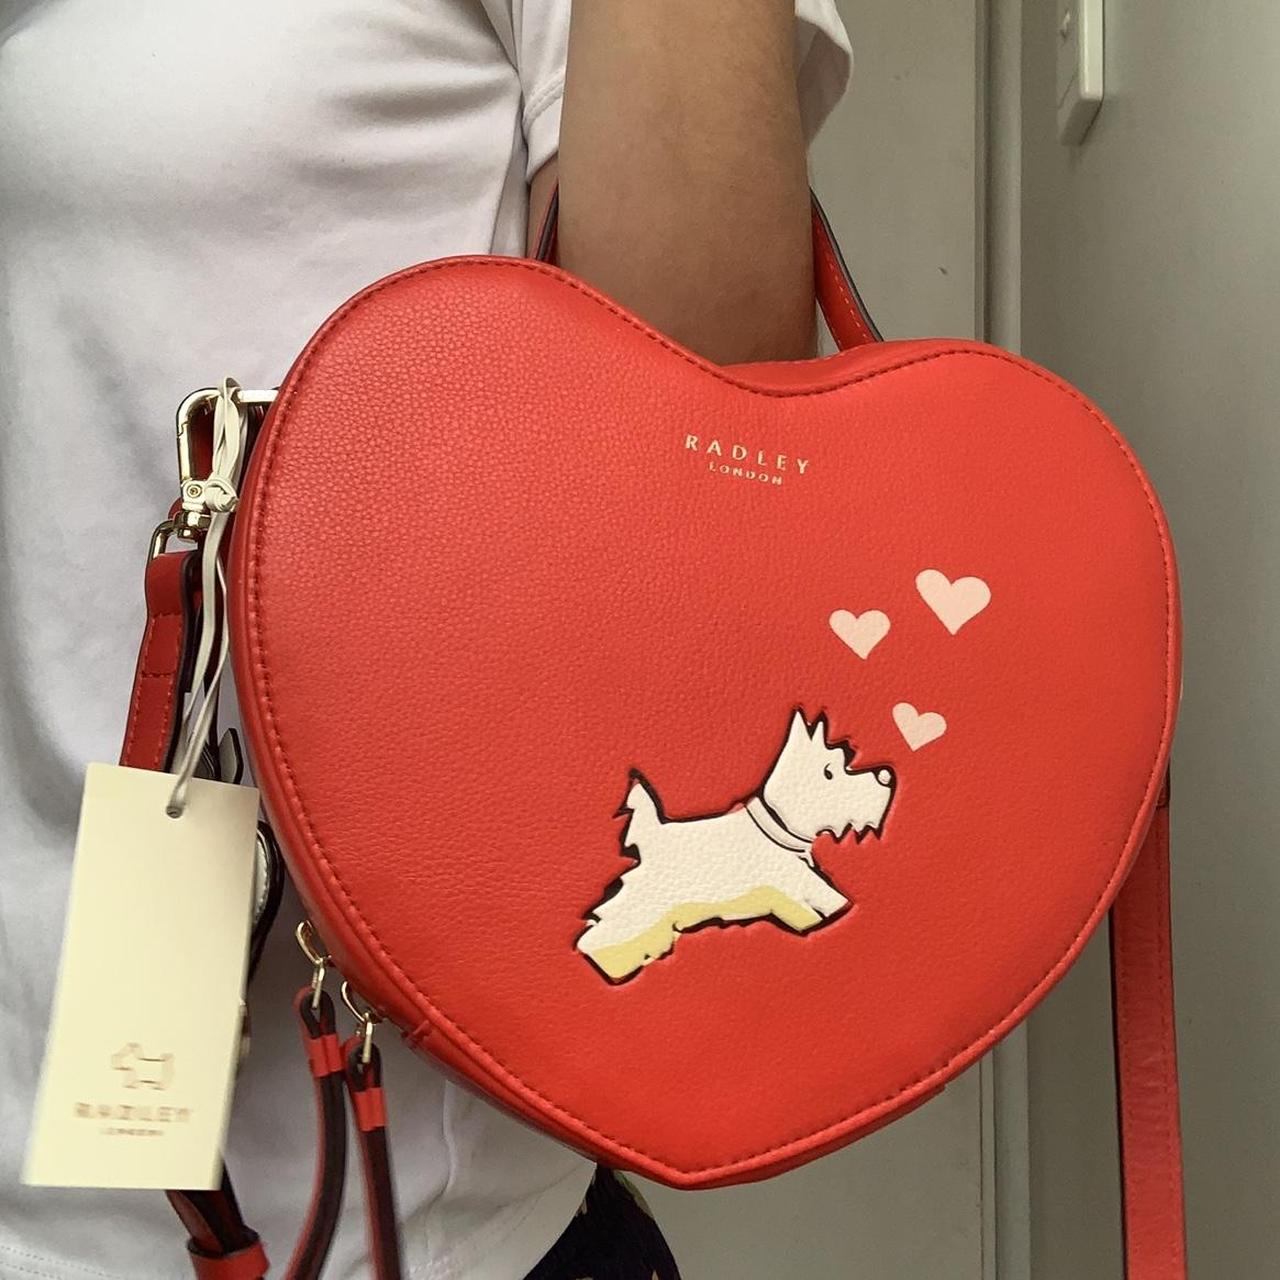 Radley love potion Brand new with tags Imported... - Depop